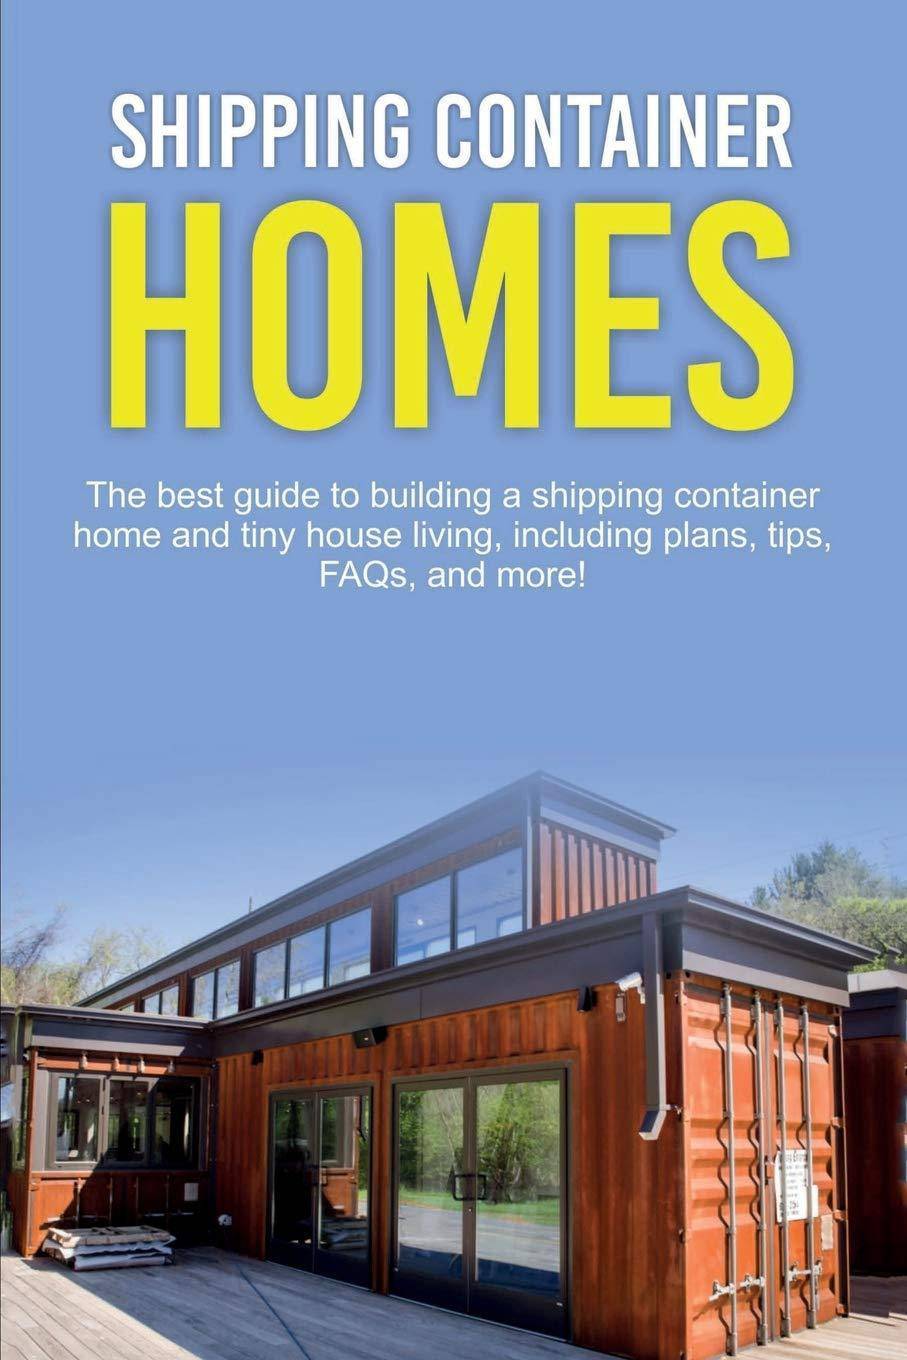 Shipping Container Homes - SureShot Books Publishing LLC